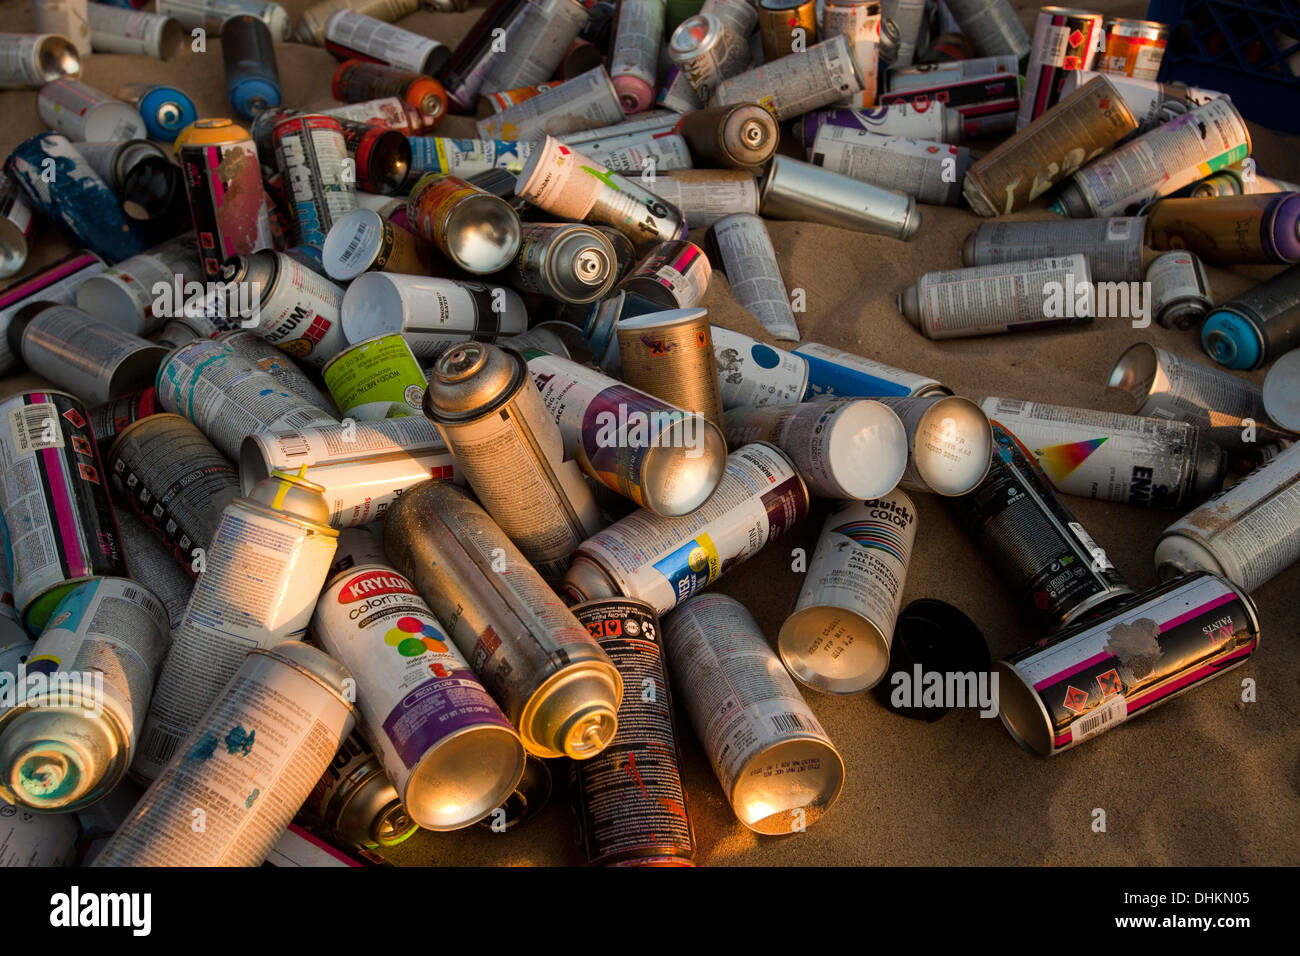 Spray Paint Cans, Venice Beach, Los Angeles, California, United States of America  Stock Photo